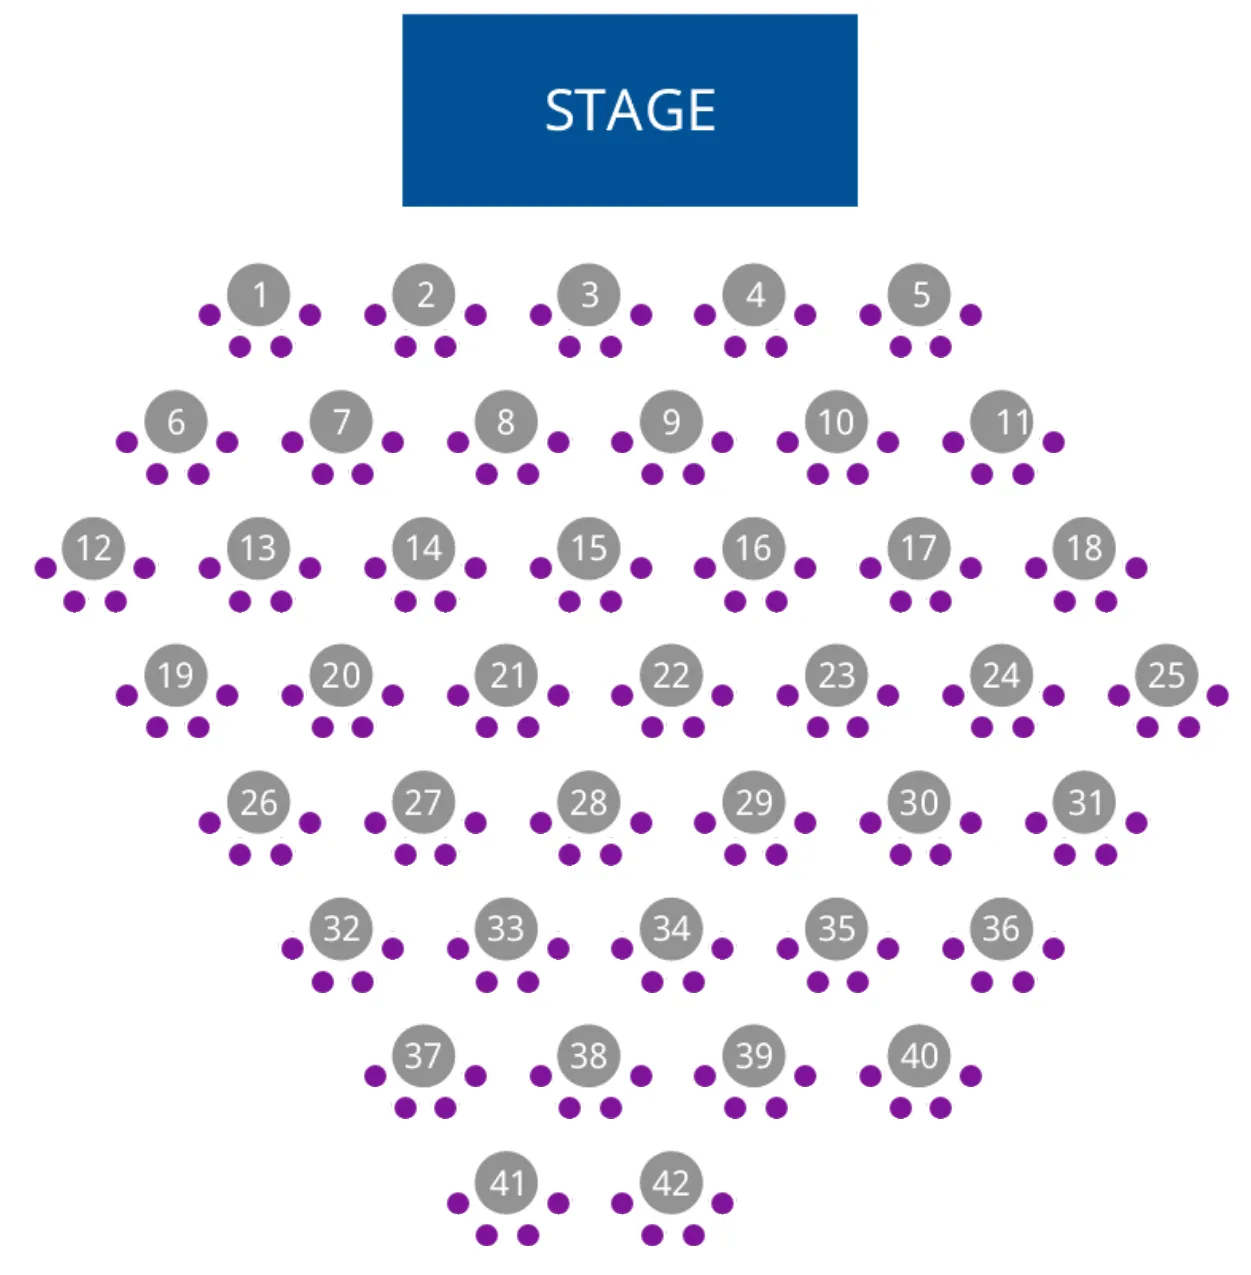 Seating plan of Secondspace Thetre